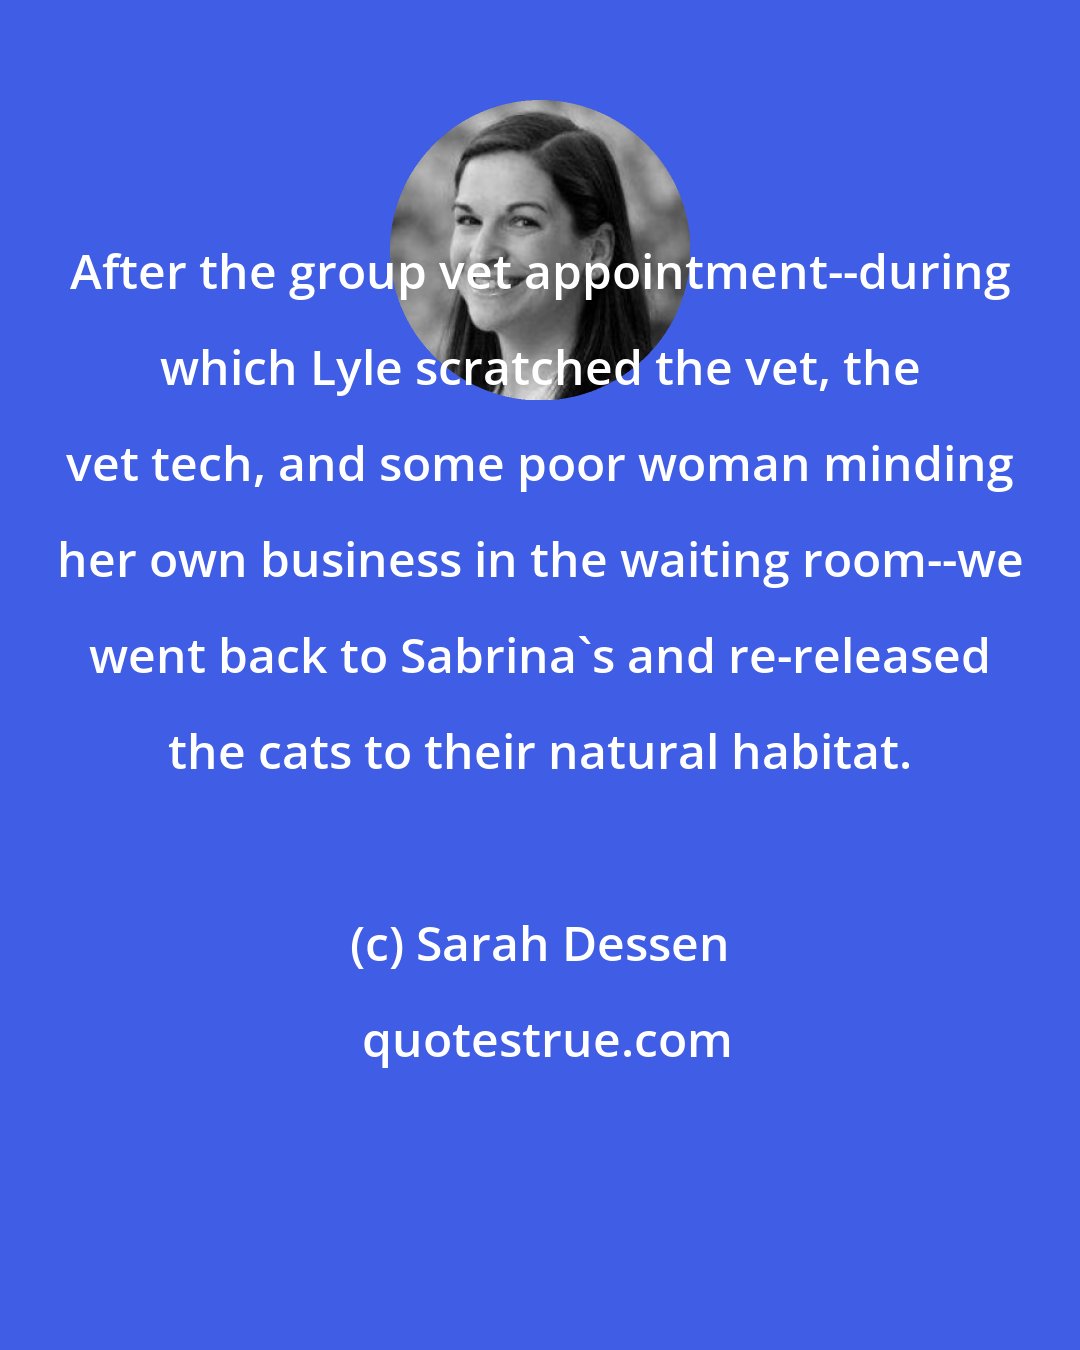 Sarah Dessen: After the group vet appointment--during which Lyle scratched the vet, the vet tech, and some poor woman minding her own business in the waiting room--we went back to Sabrina's and re-released the cats to their natural habitat.